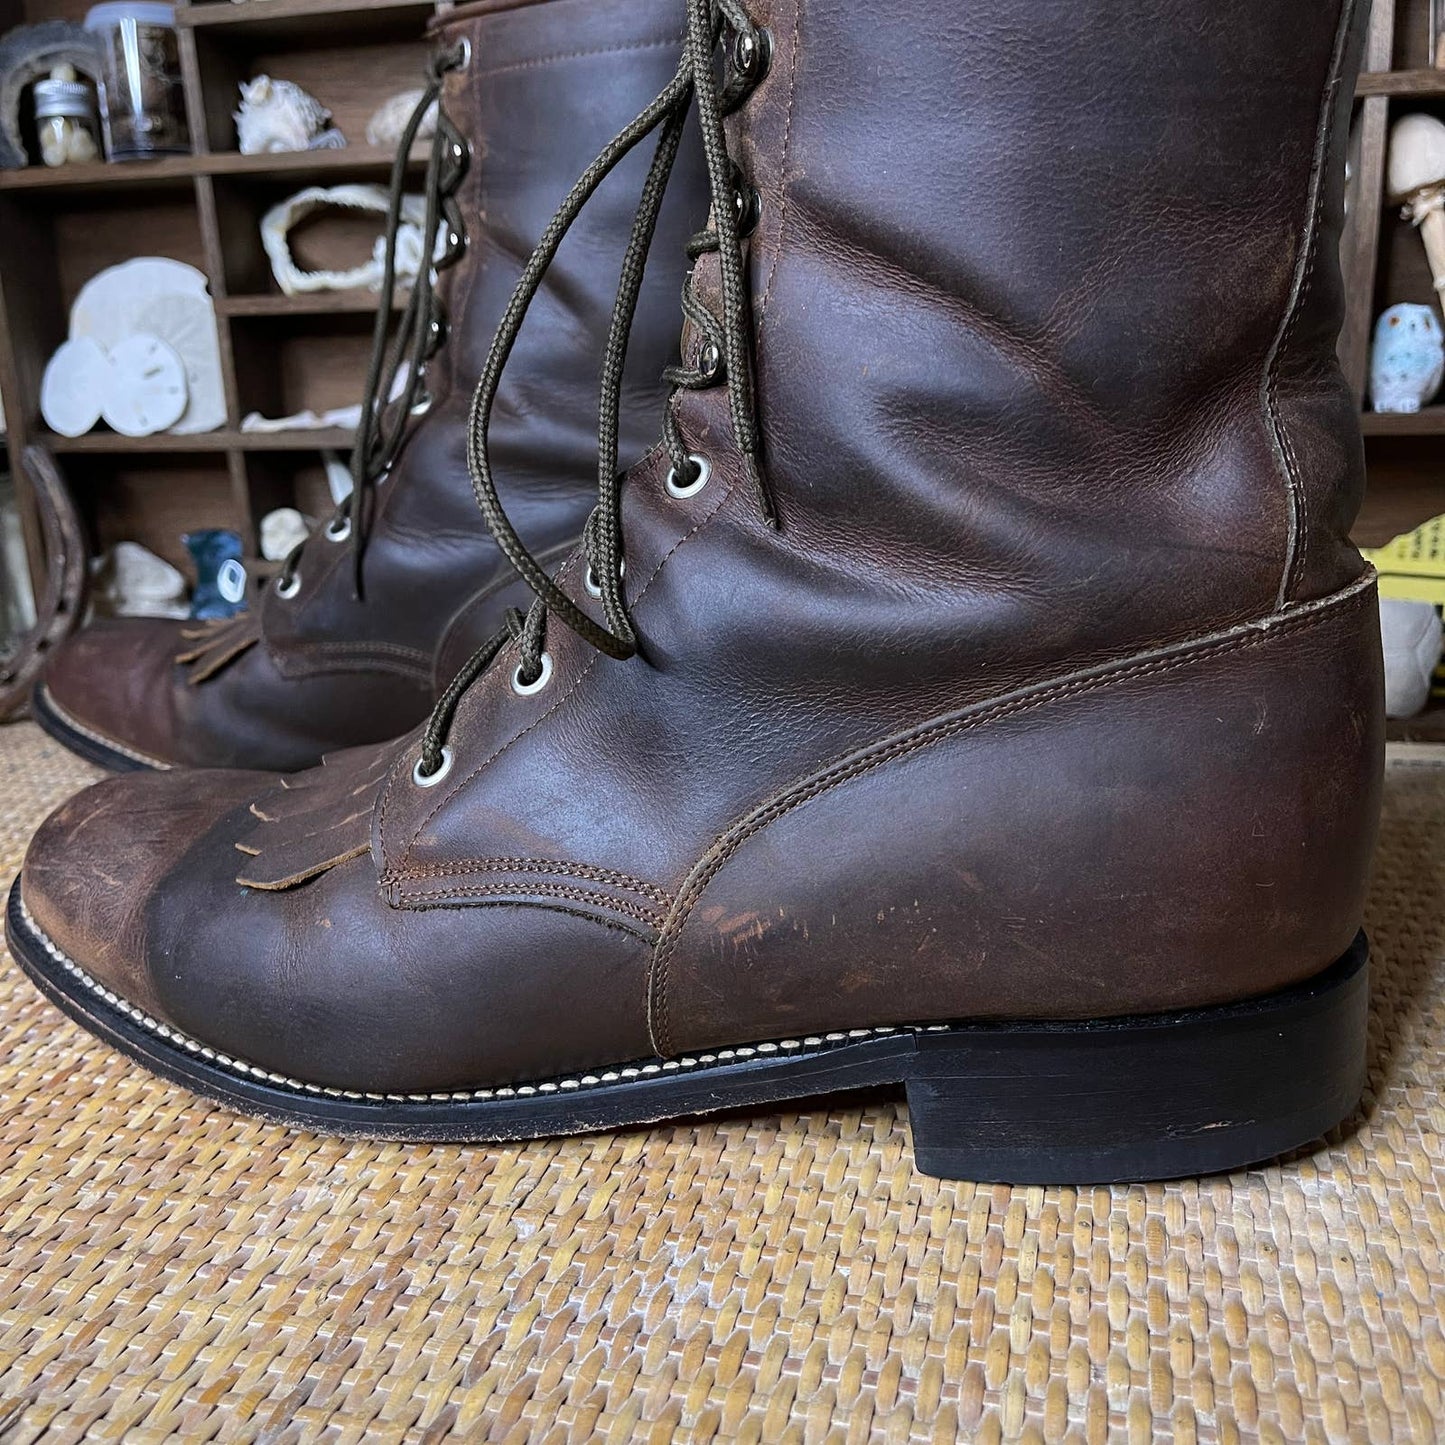 Vintage 90s Brown Leather Lace up Roper Boots by Tony Lama Size 11